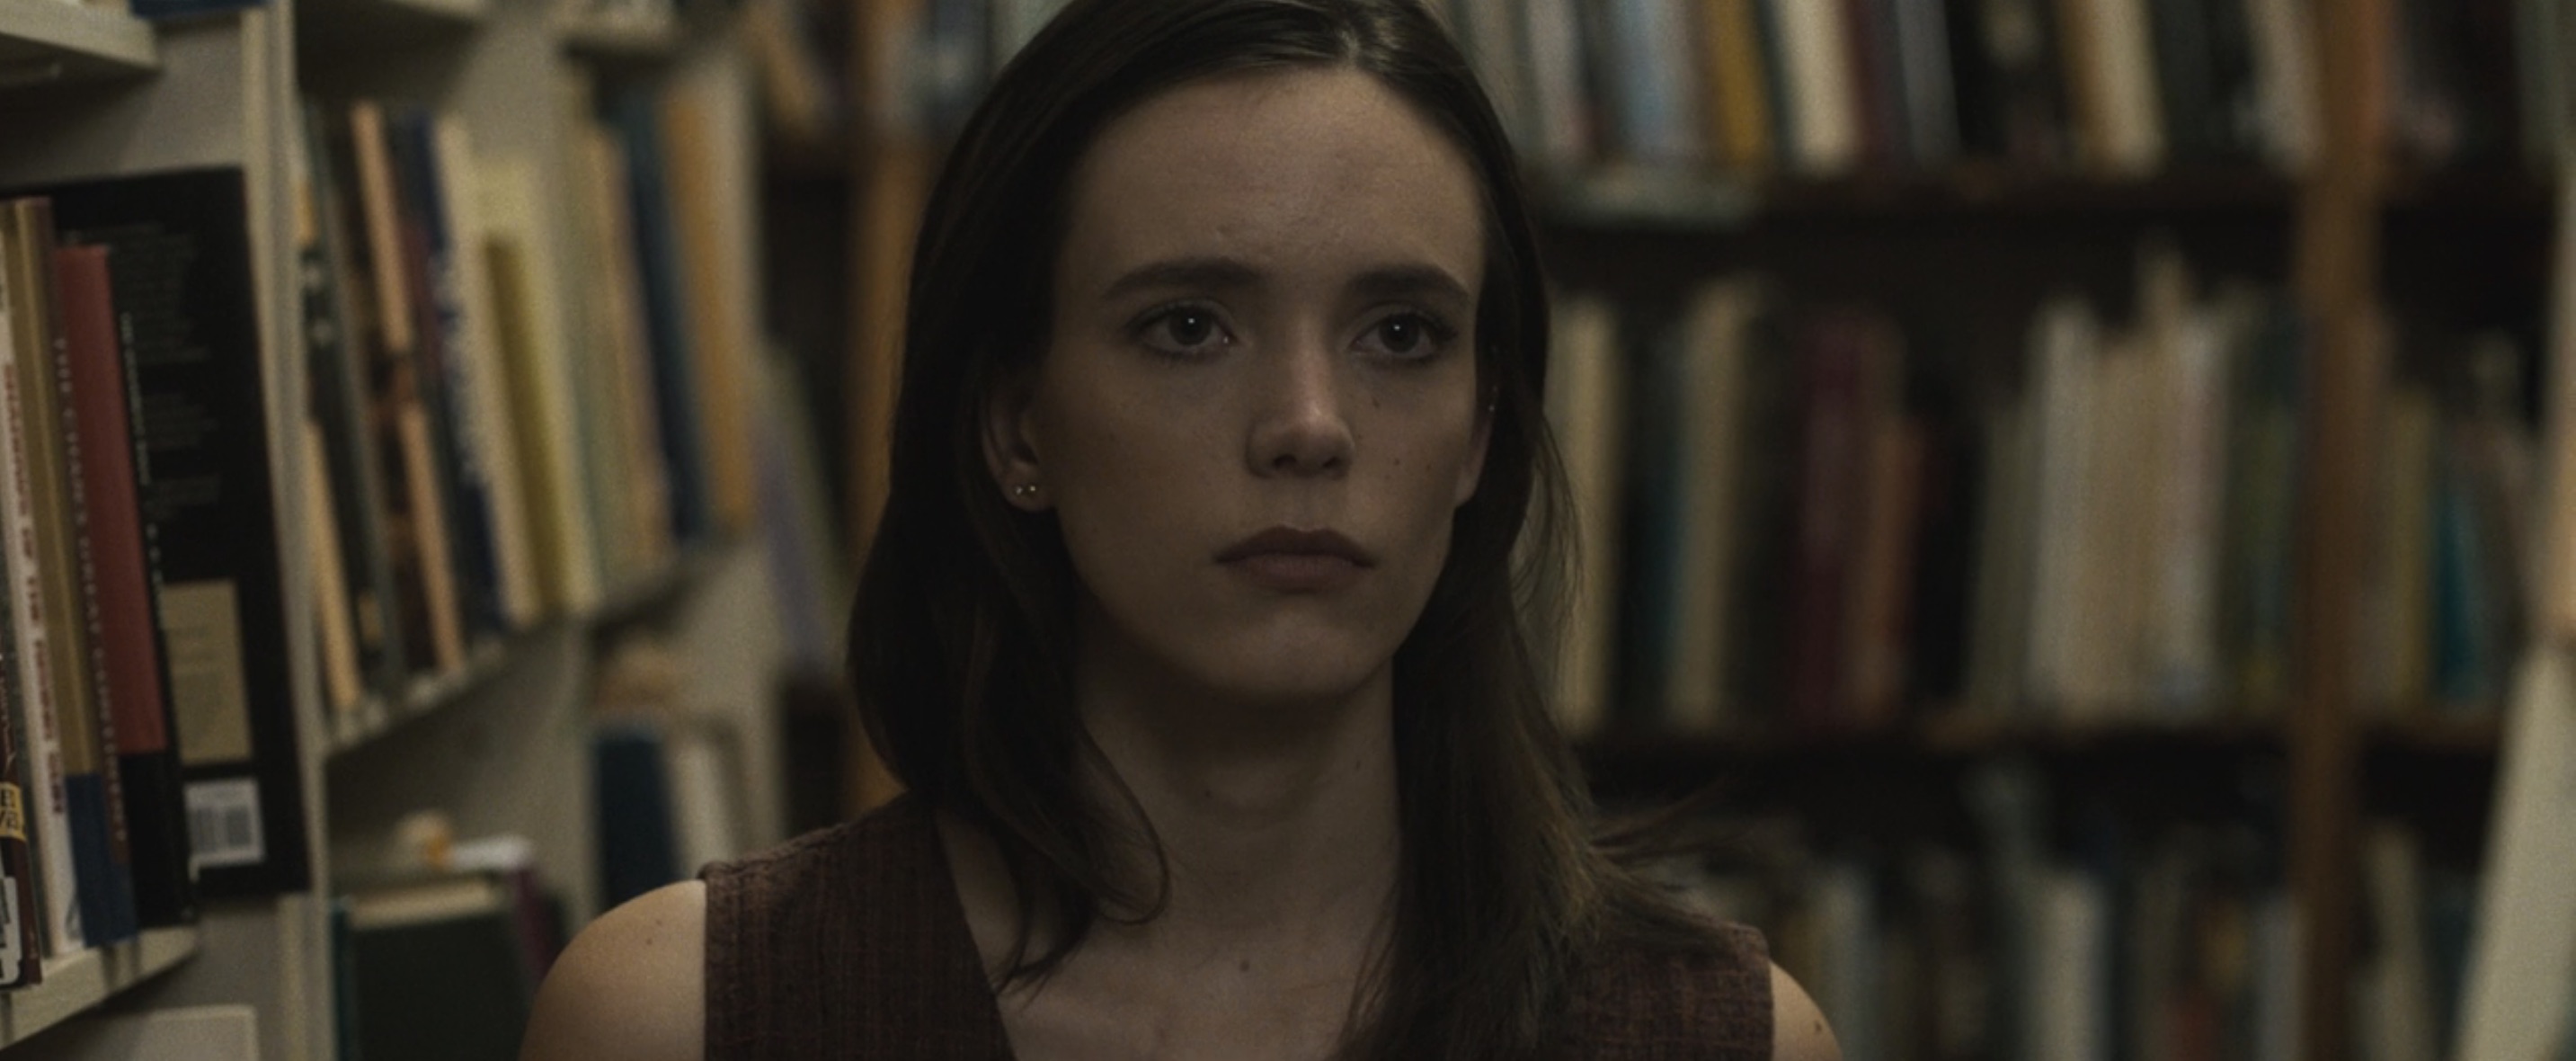 The Night House - Stacy Martin as Madelyne